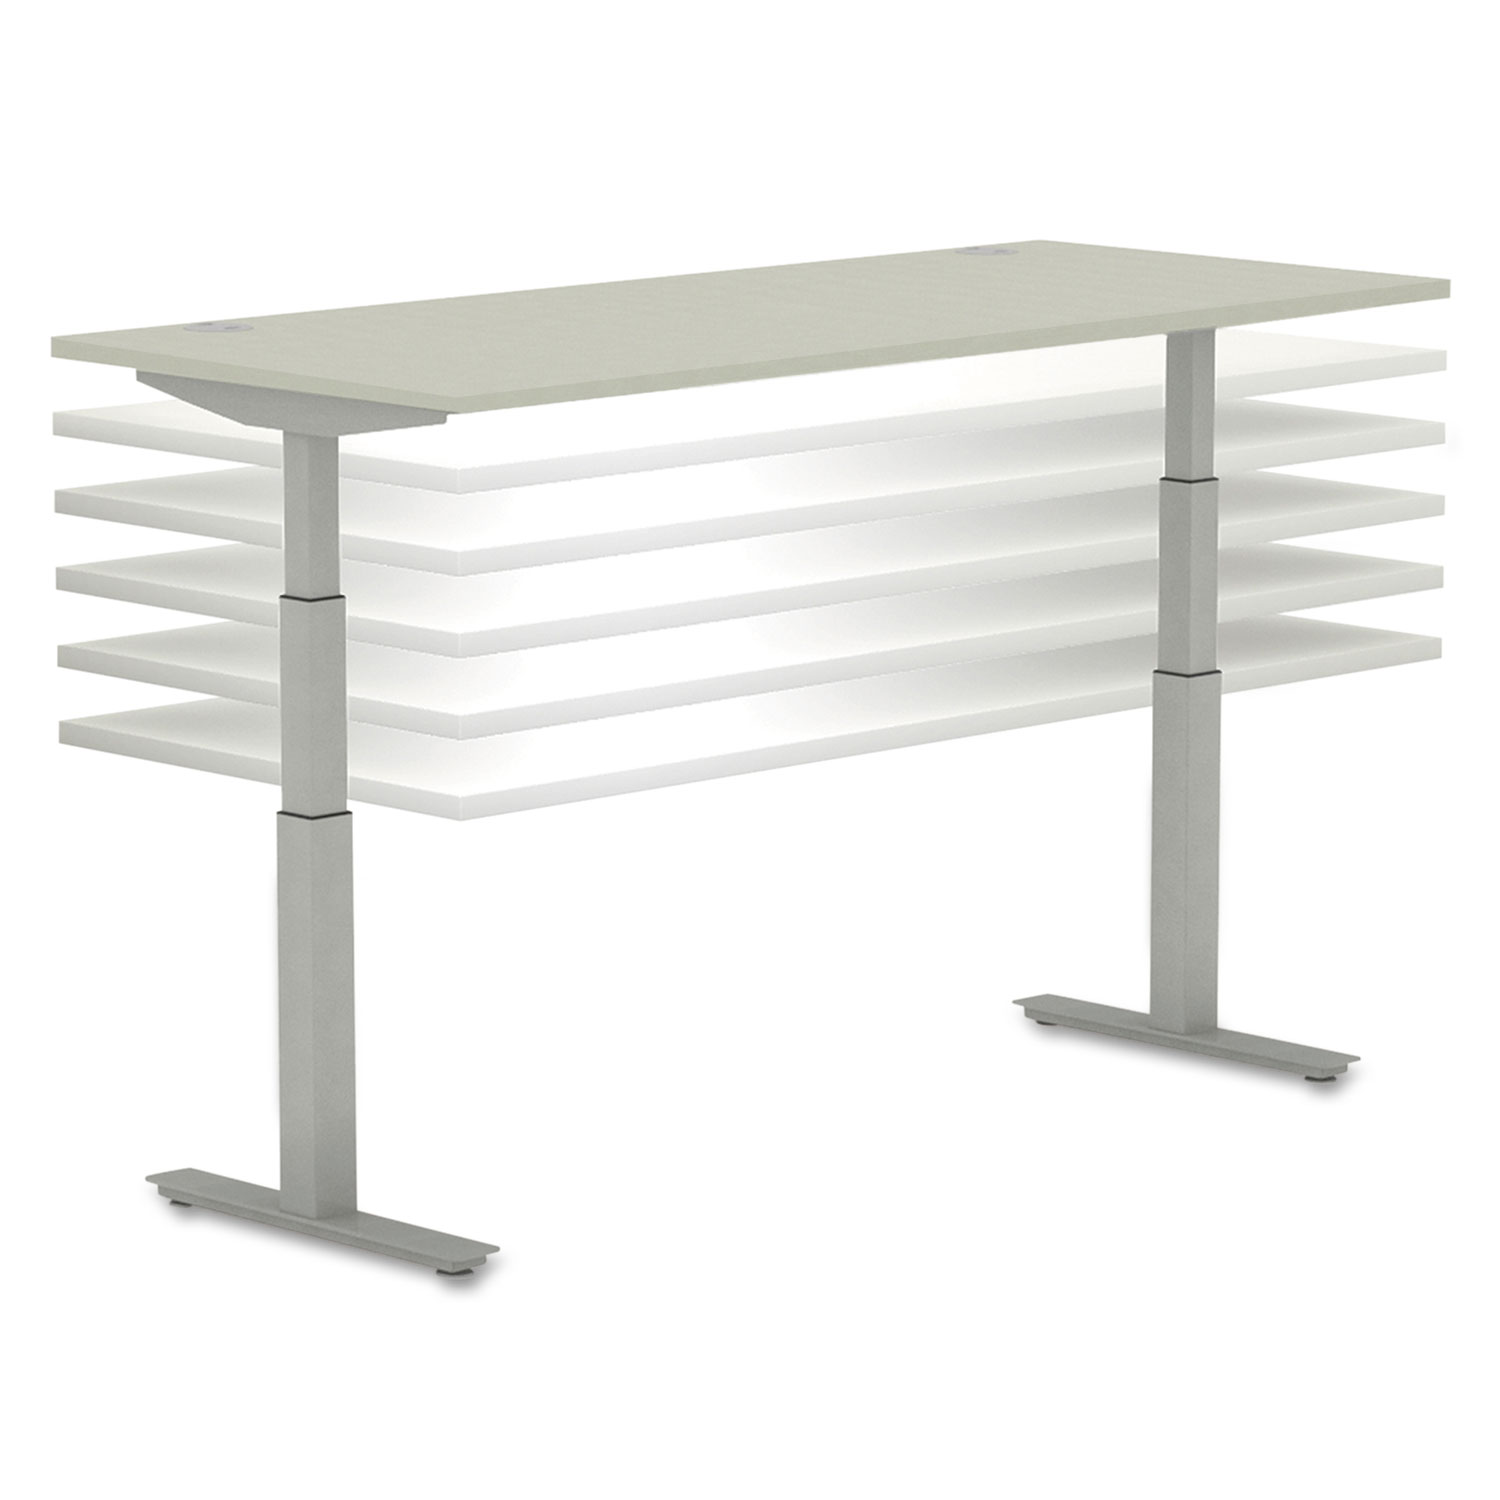 Height-Adjustable Table Base, 72w x 24d x 23 5/8-49 1/4h, Silver